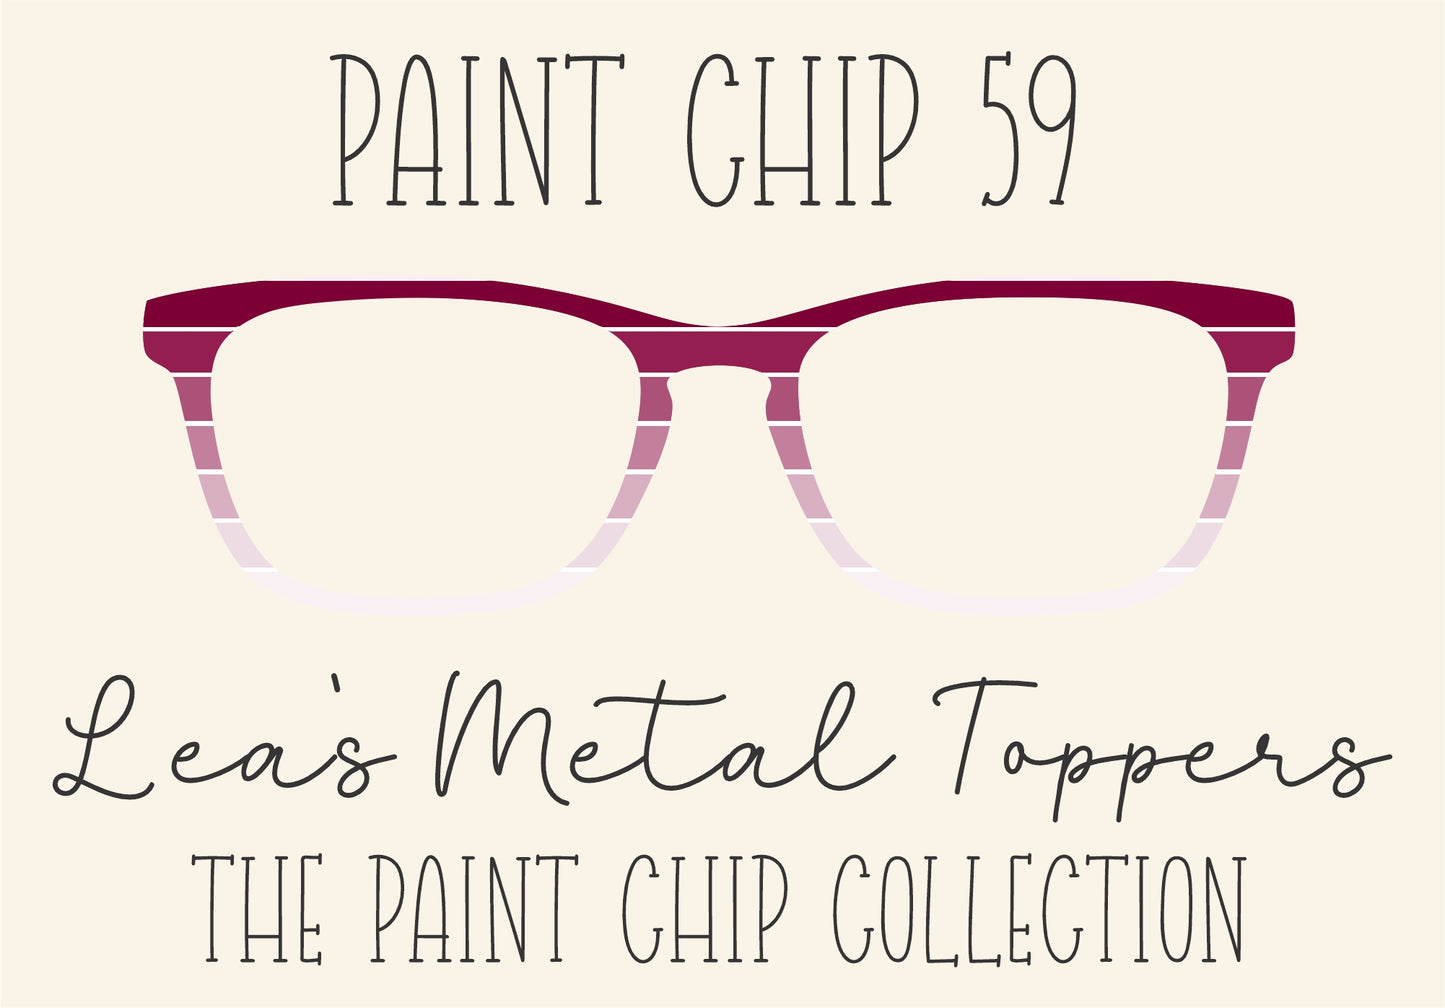 PAINT CHIP 59 Eyewear Frame Toppers COMES WITH MAGNETS